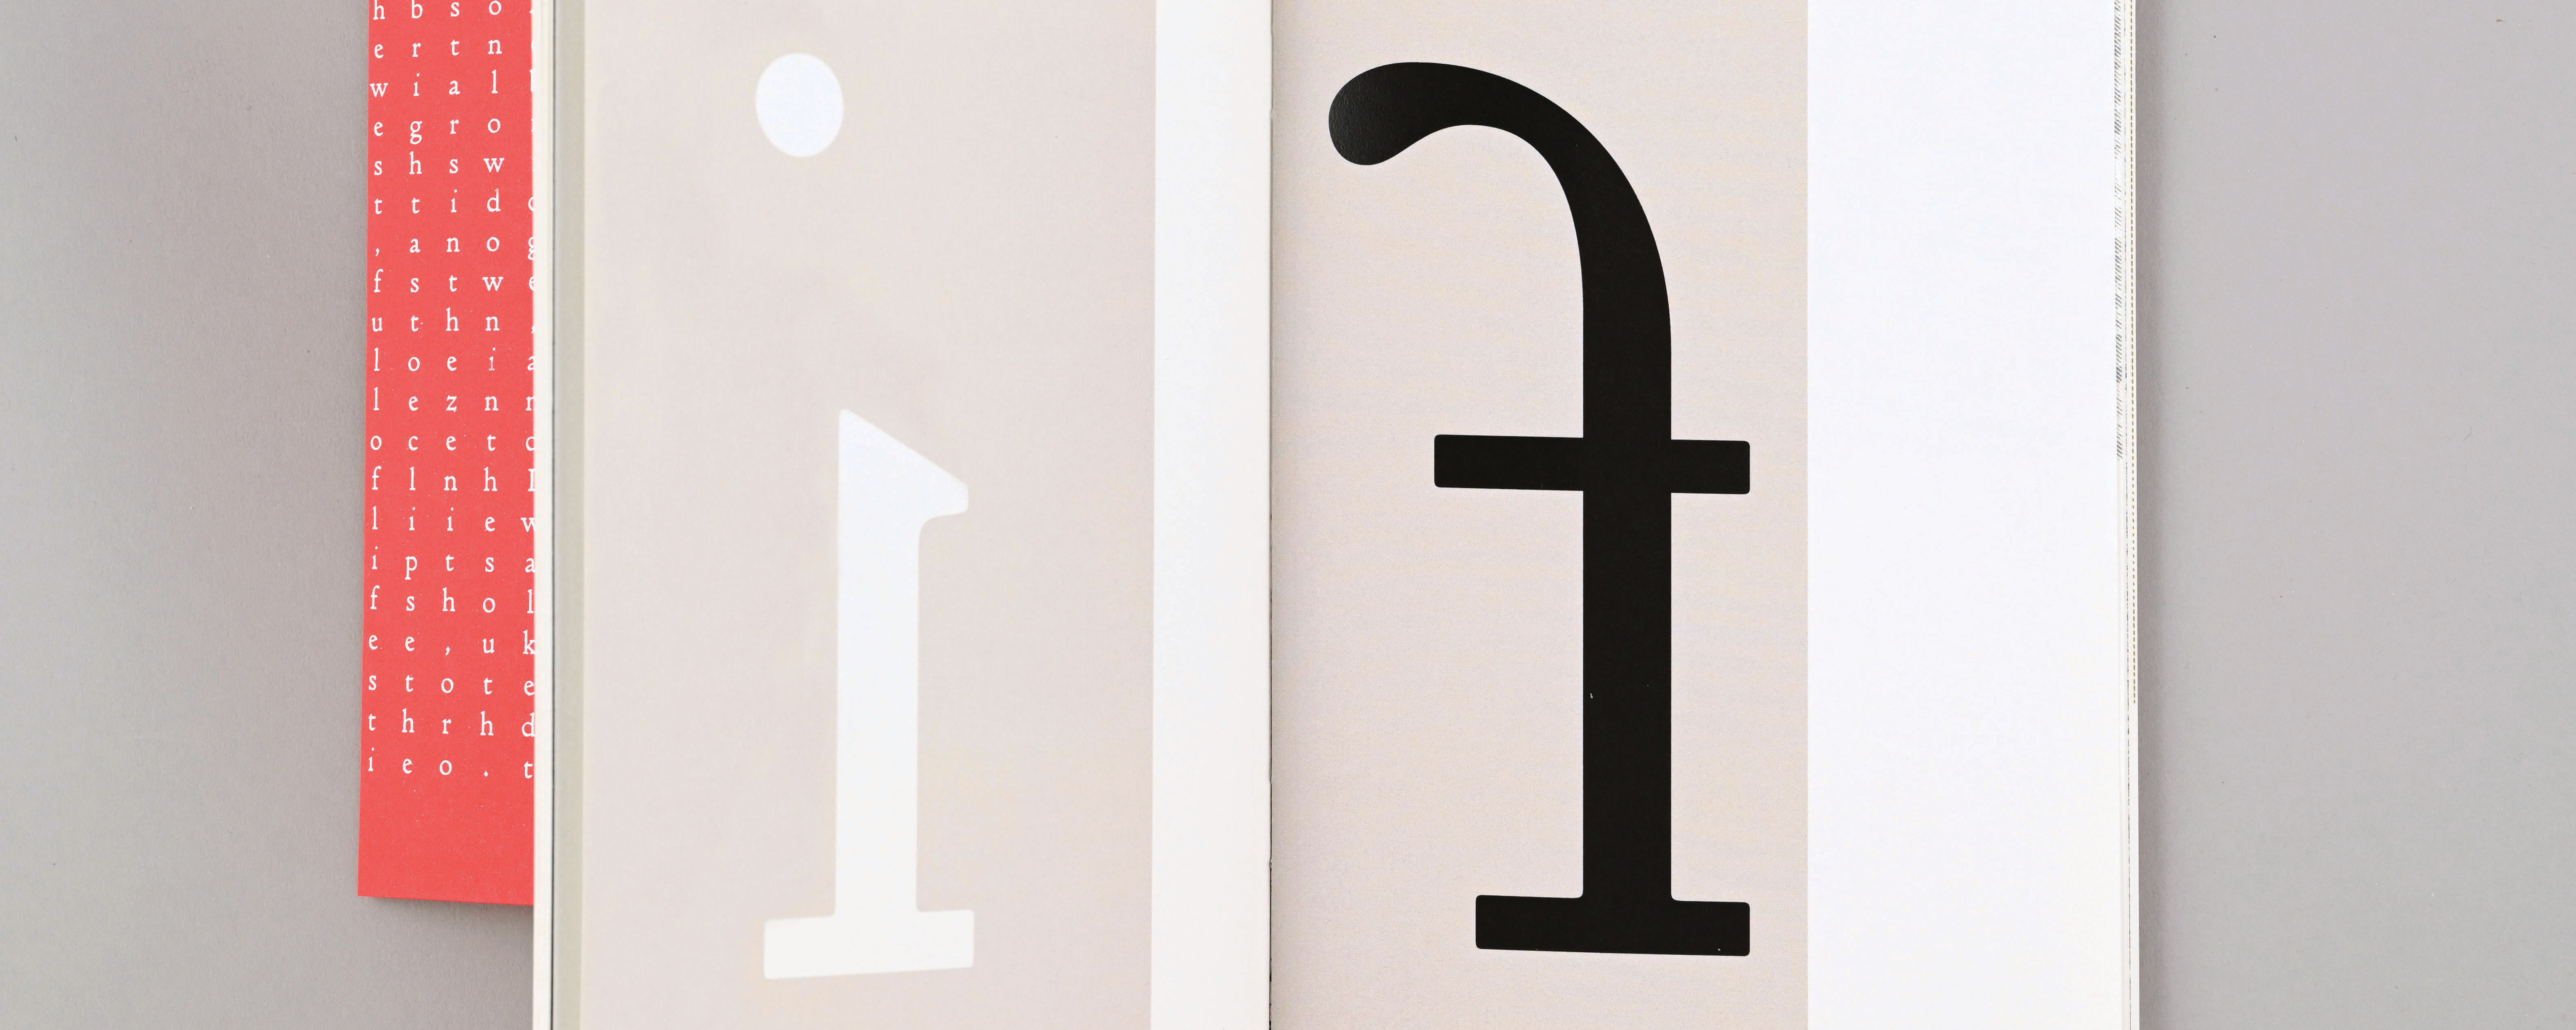 Close-up of a book, showing a large printer letter 'F'.